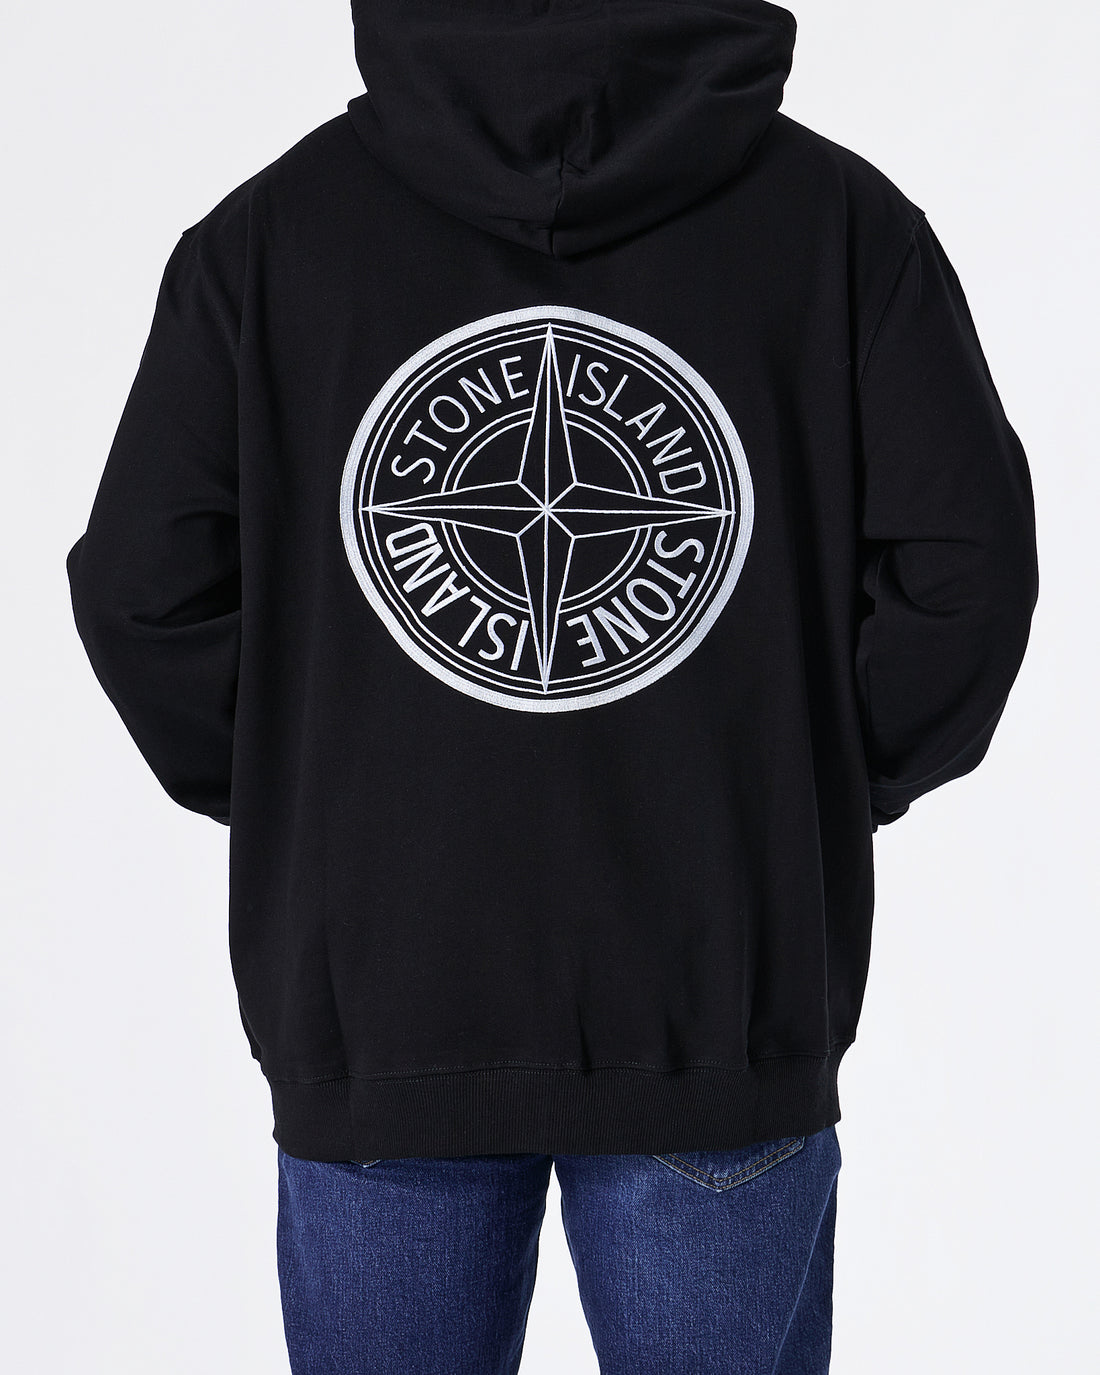 SIL Back Logo Embroidered Men Black Zipped Hoodie 39.90